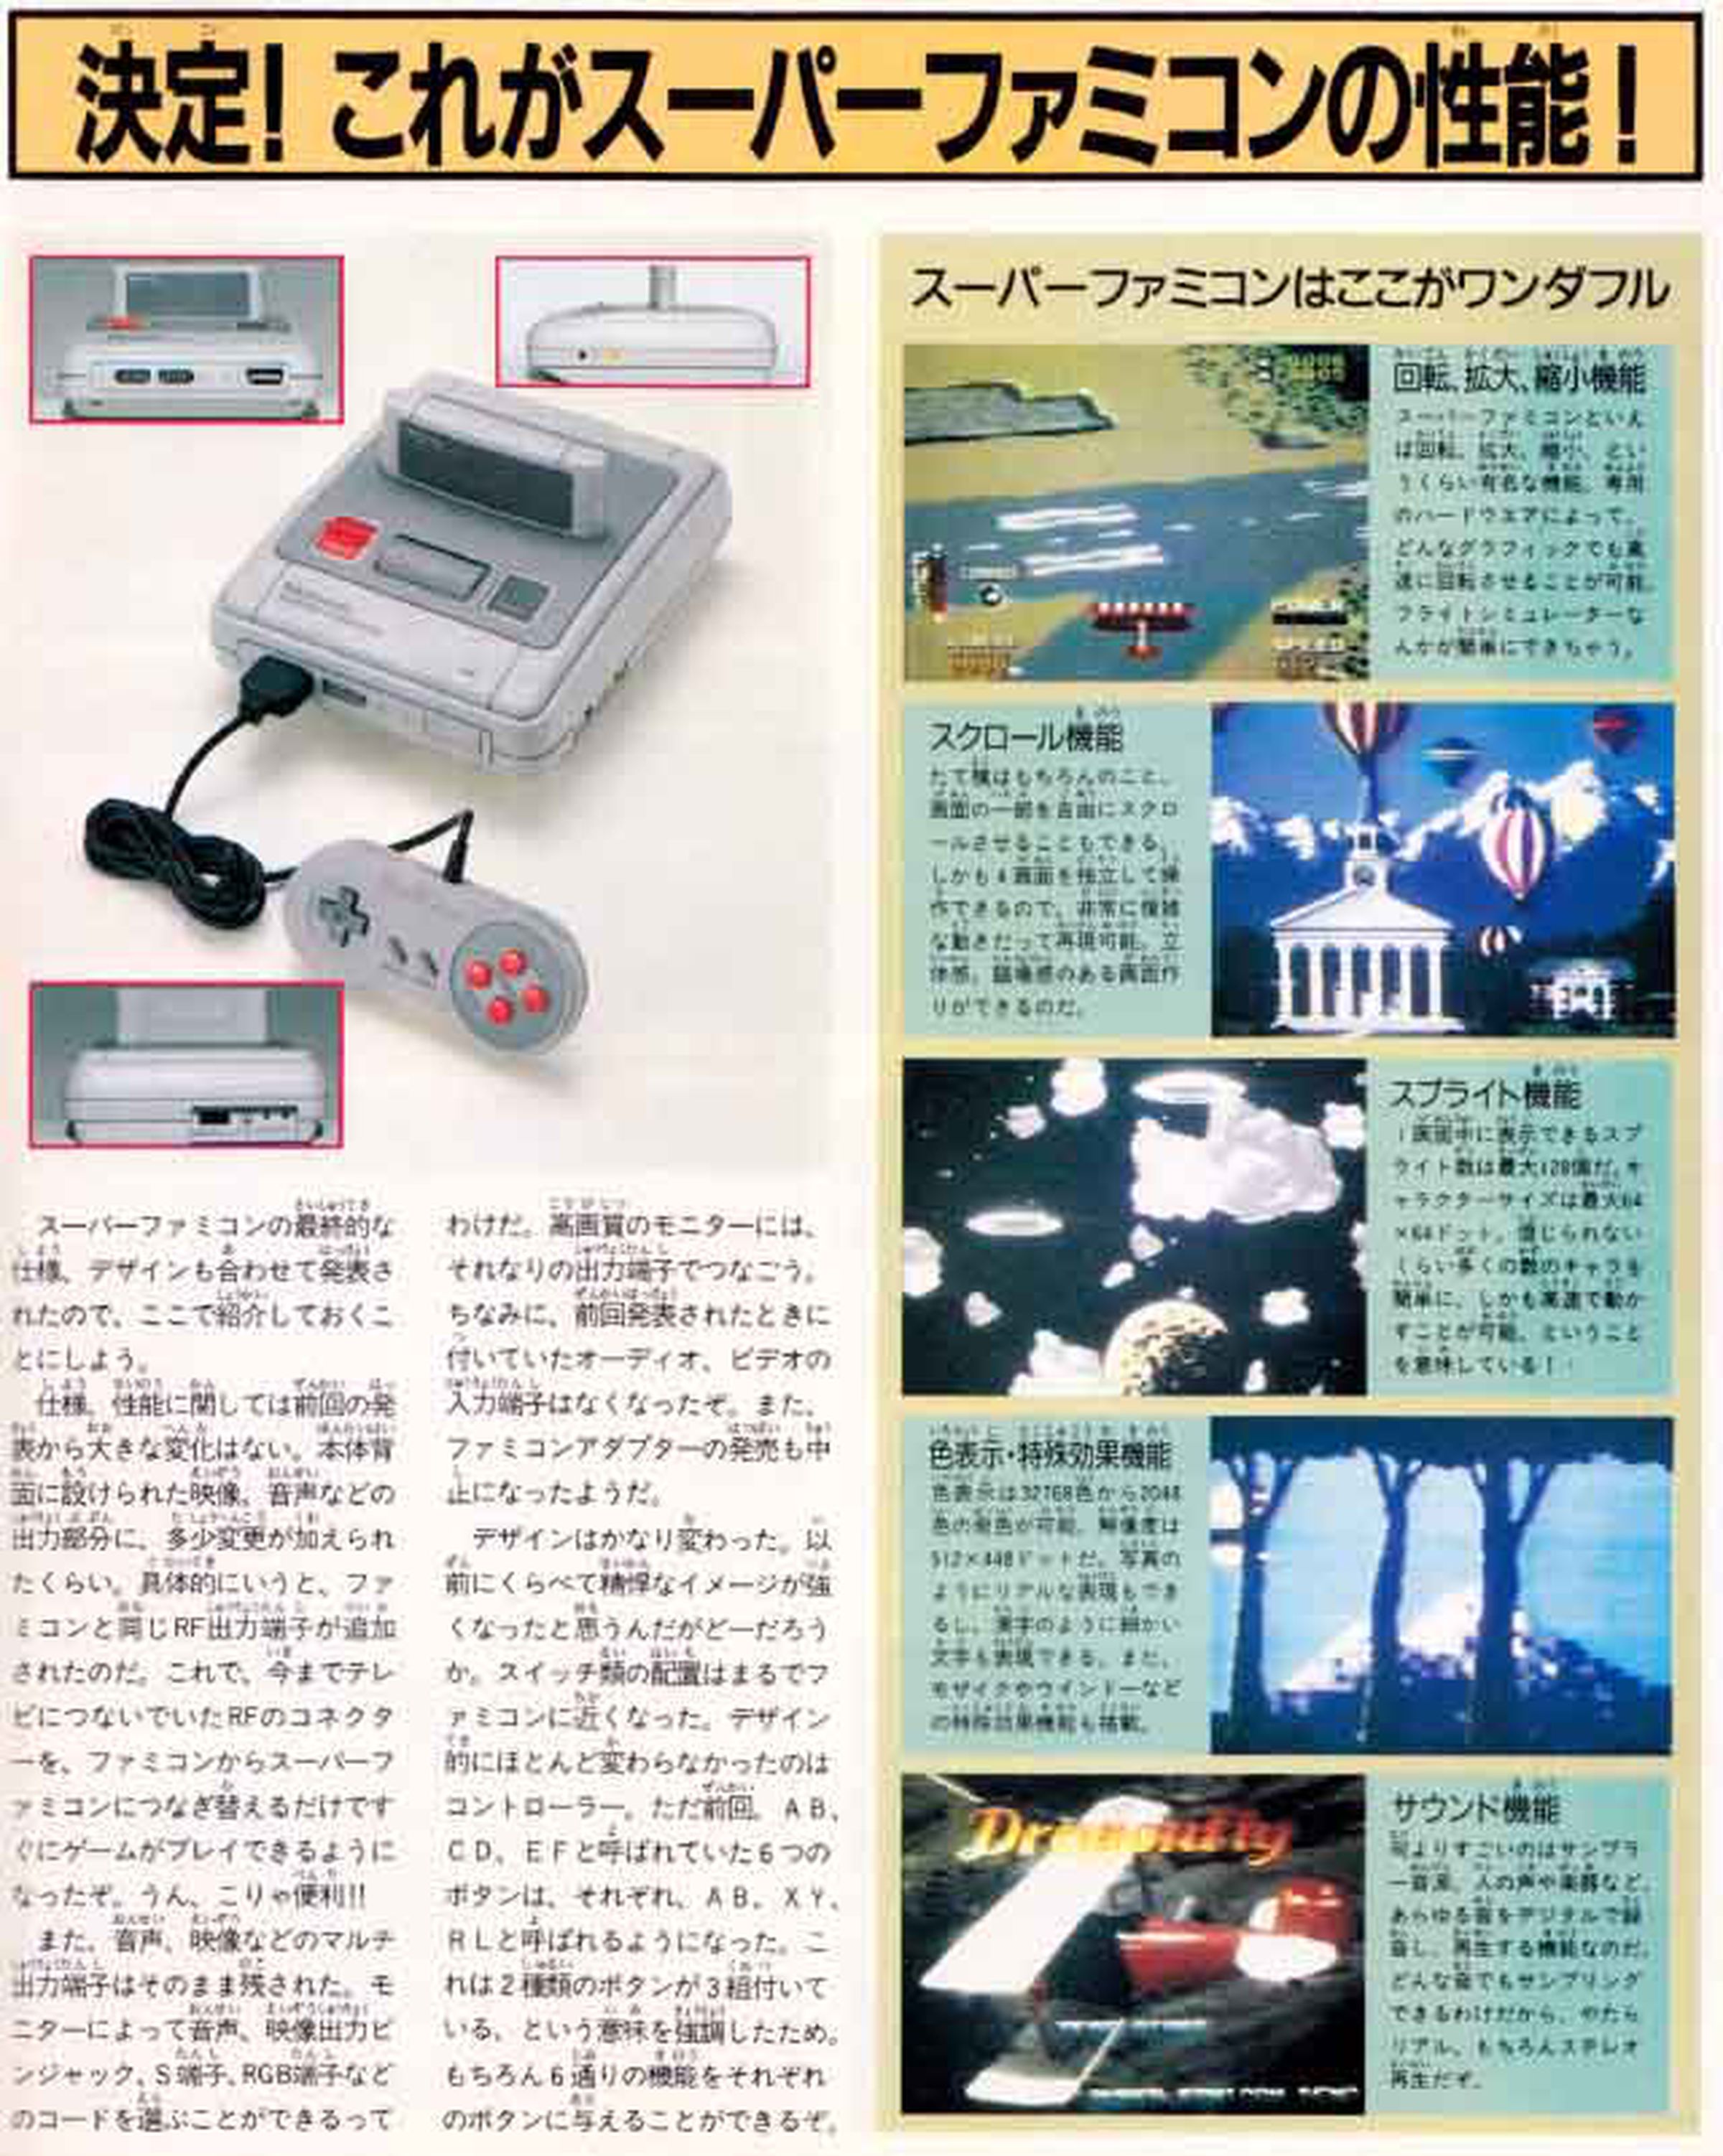 A magazine scan showing coverage of a Super Famicom prototype.